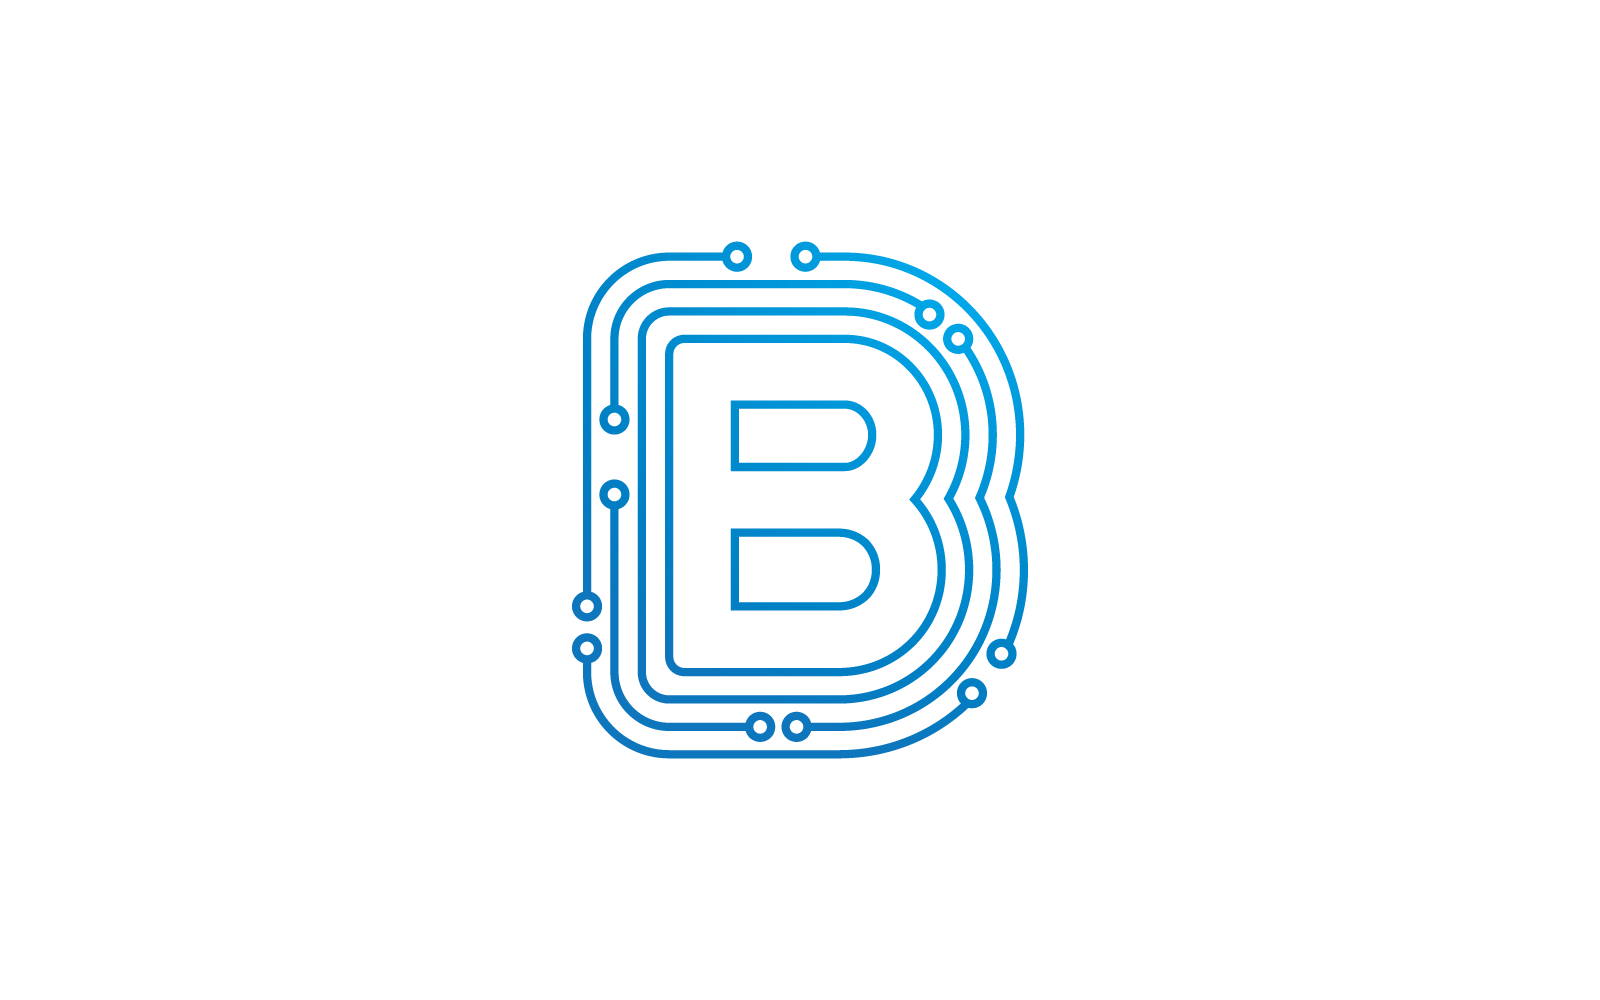 B initial letter Circuit technology illustration logo vector template